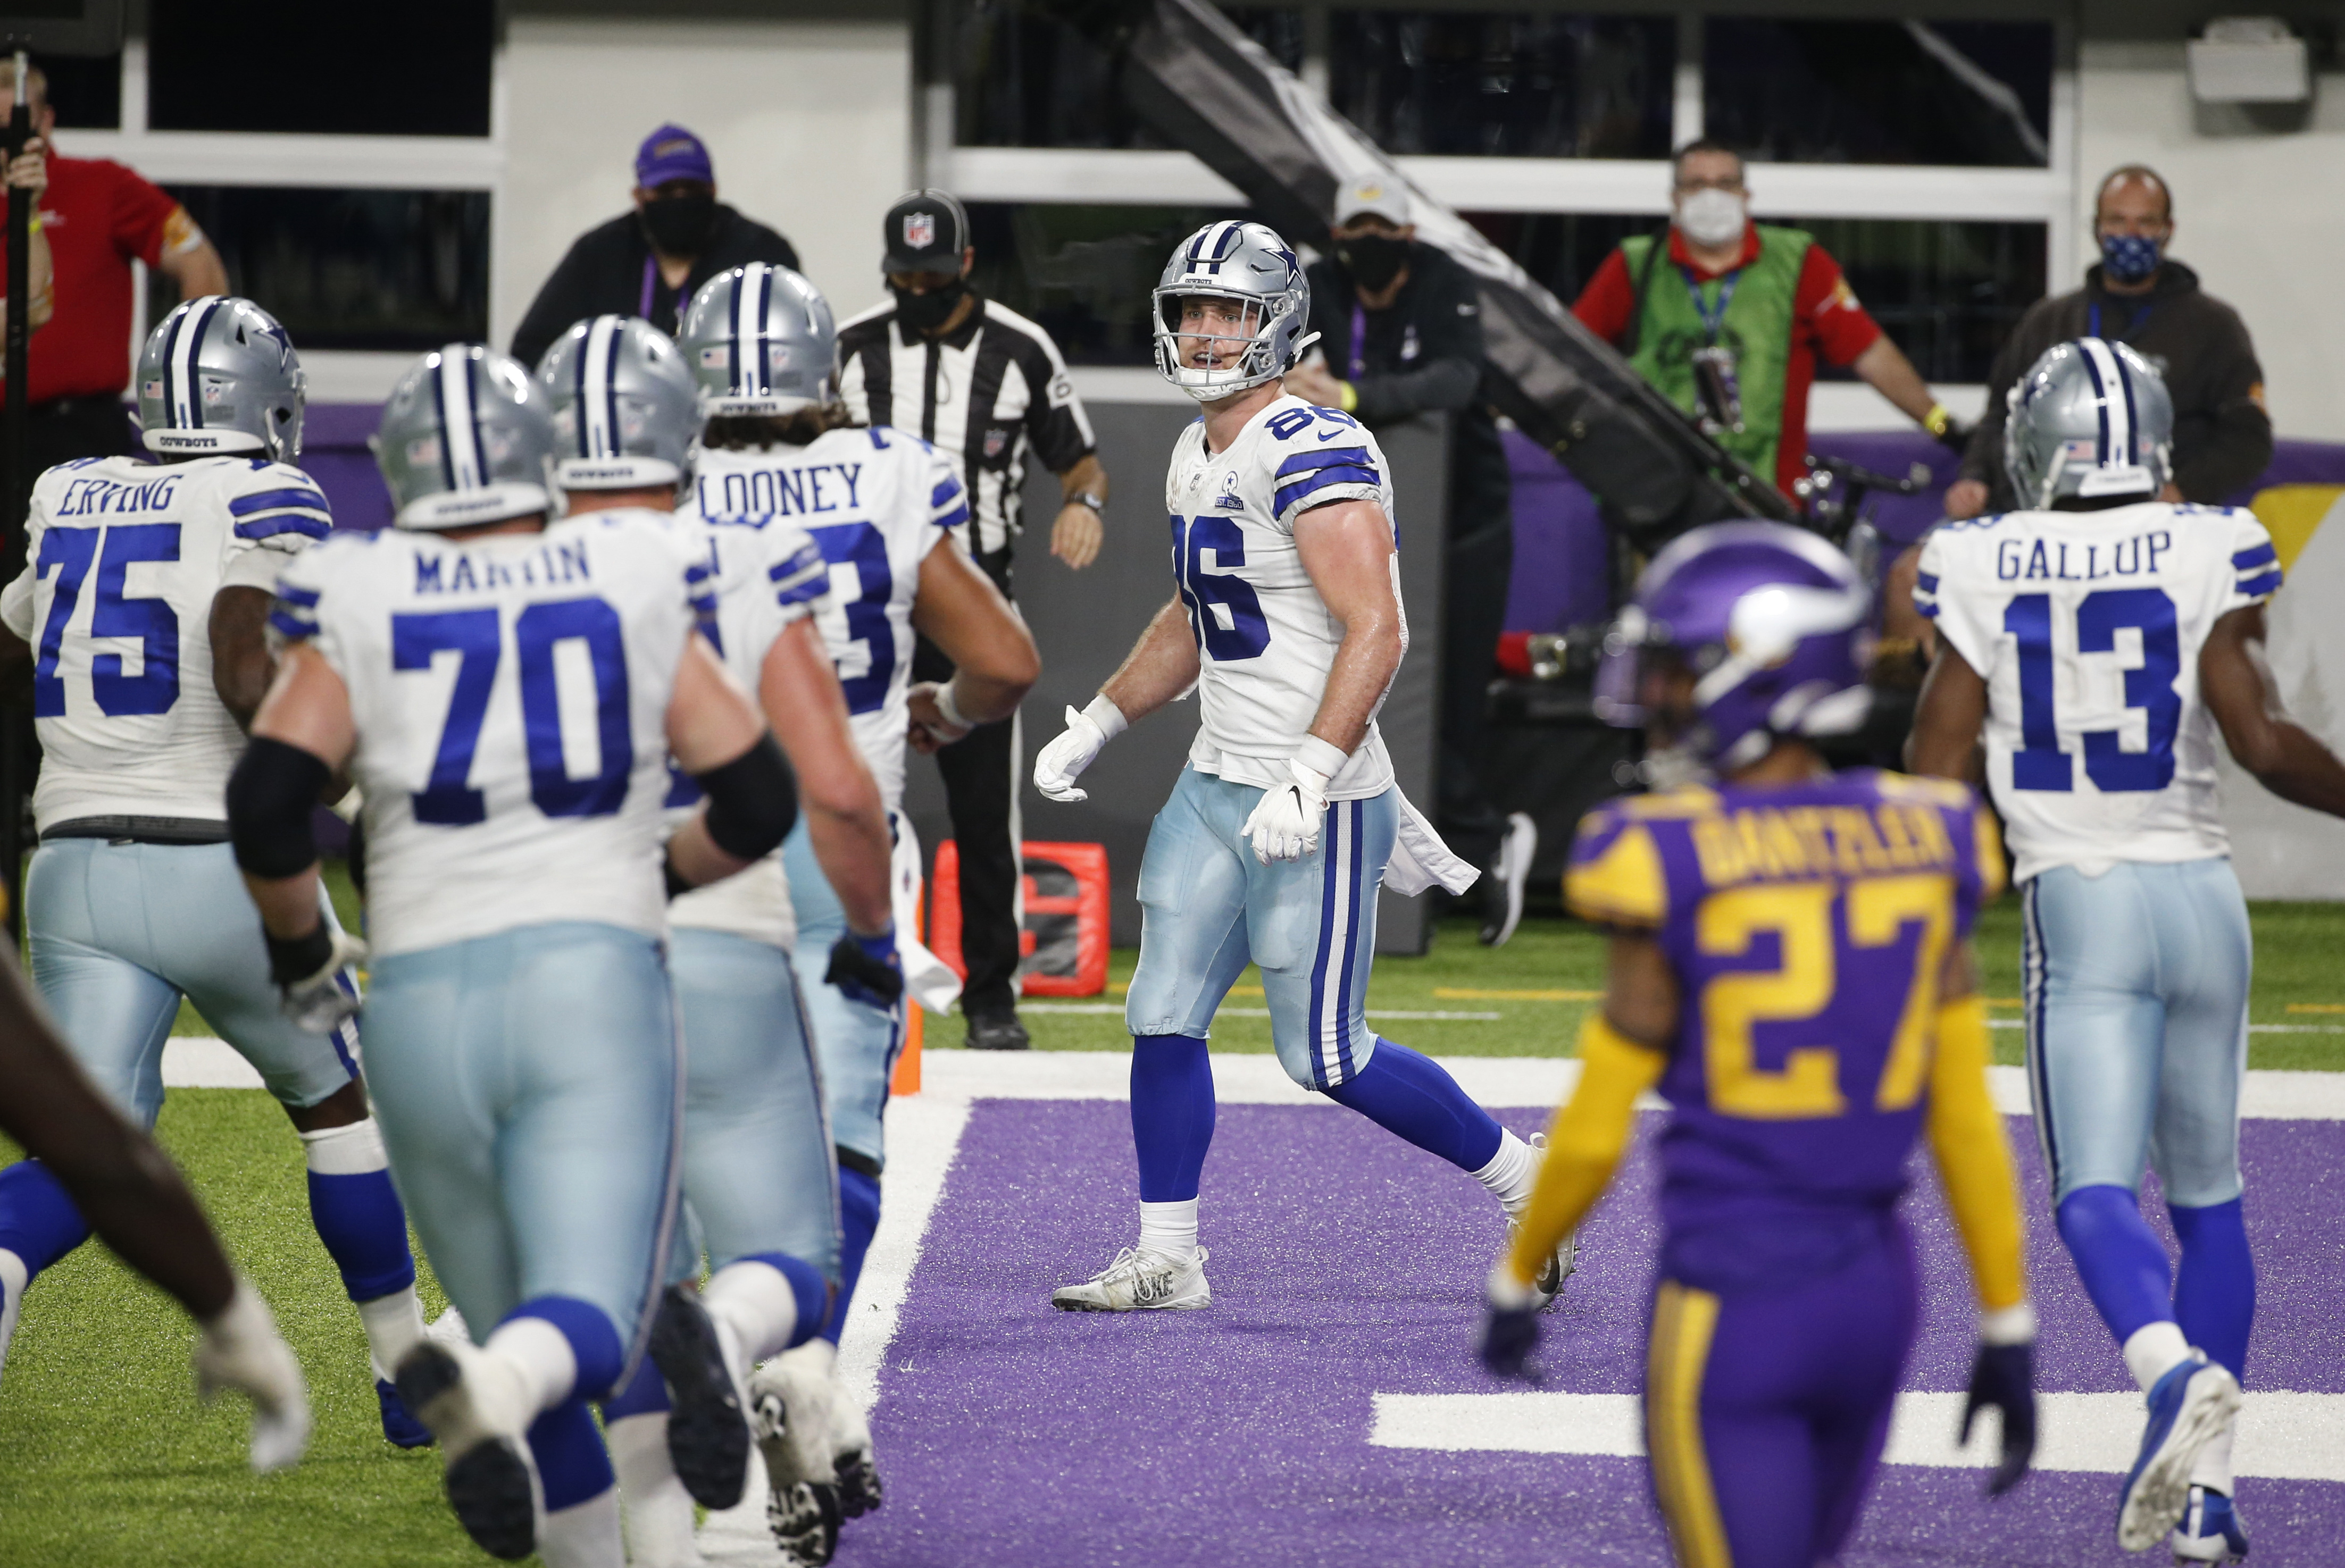 NFL Thanksgiving Day previews: Bills, Cowboys, Vikings in action